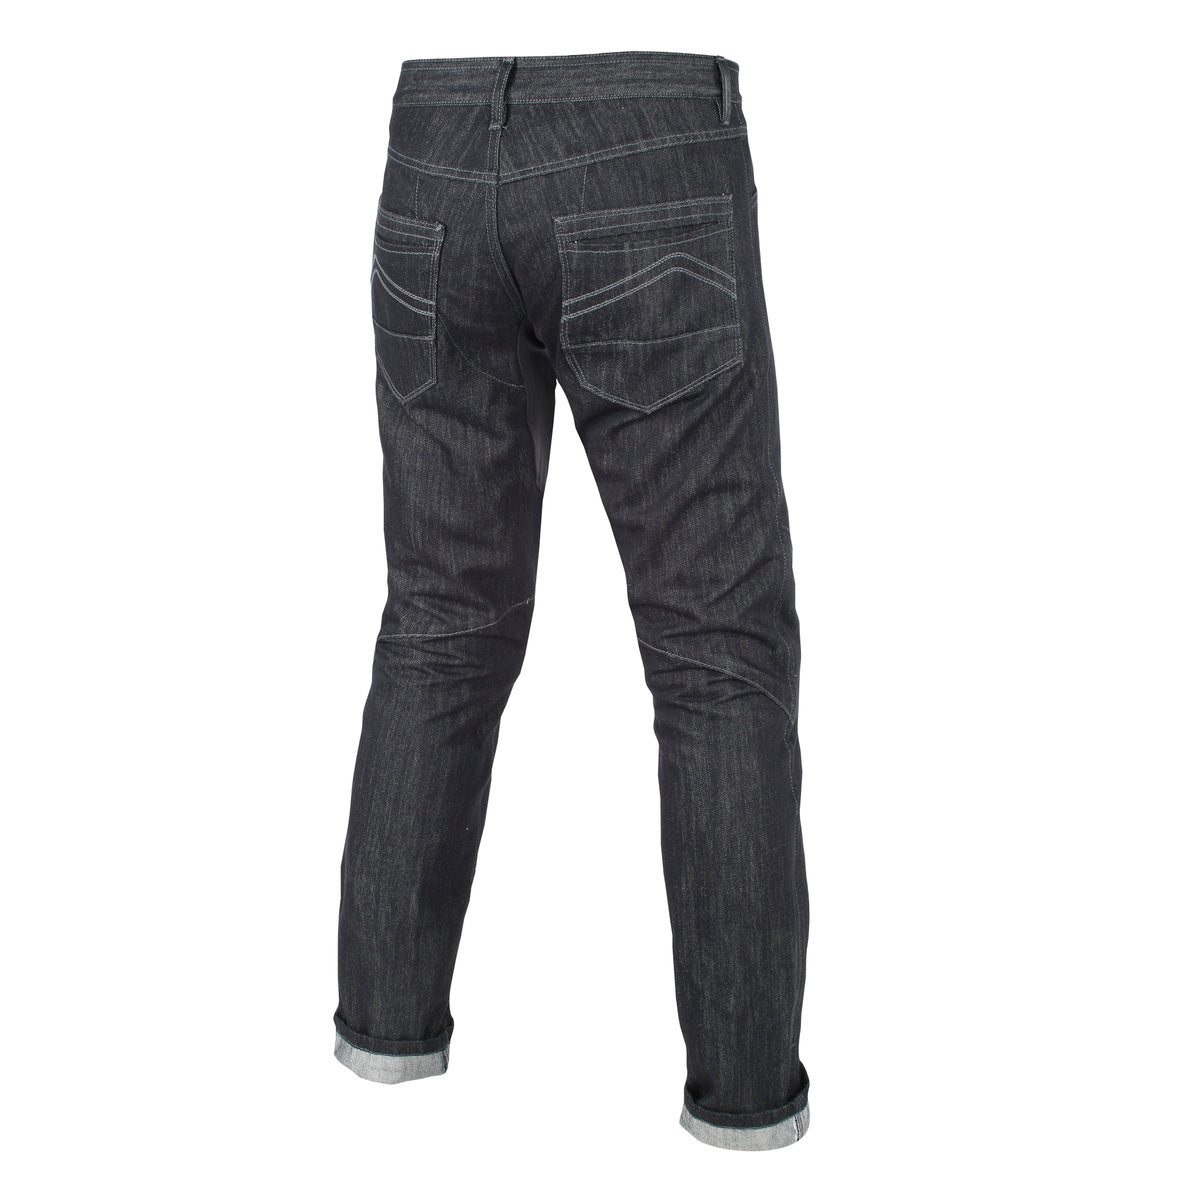 Dainese Charger Regular Jeans